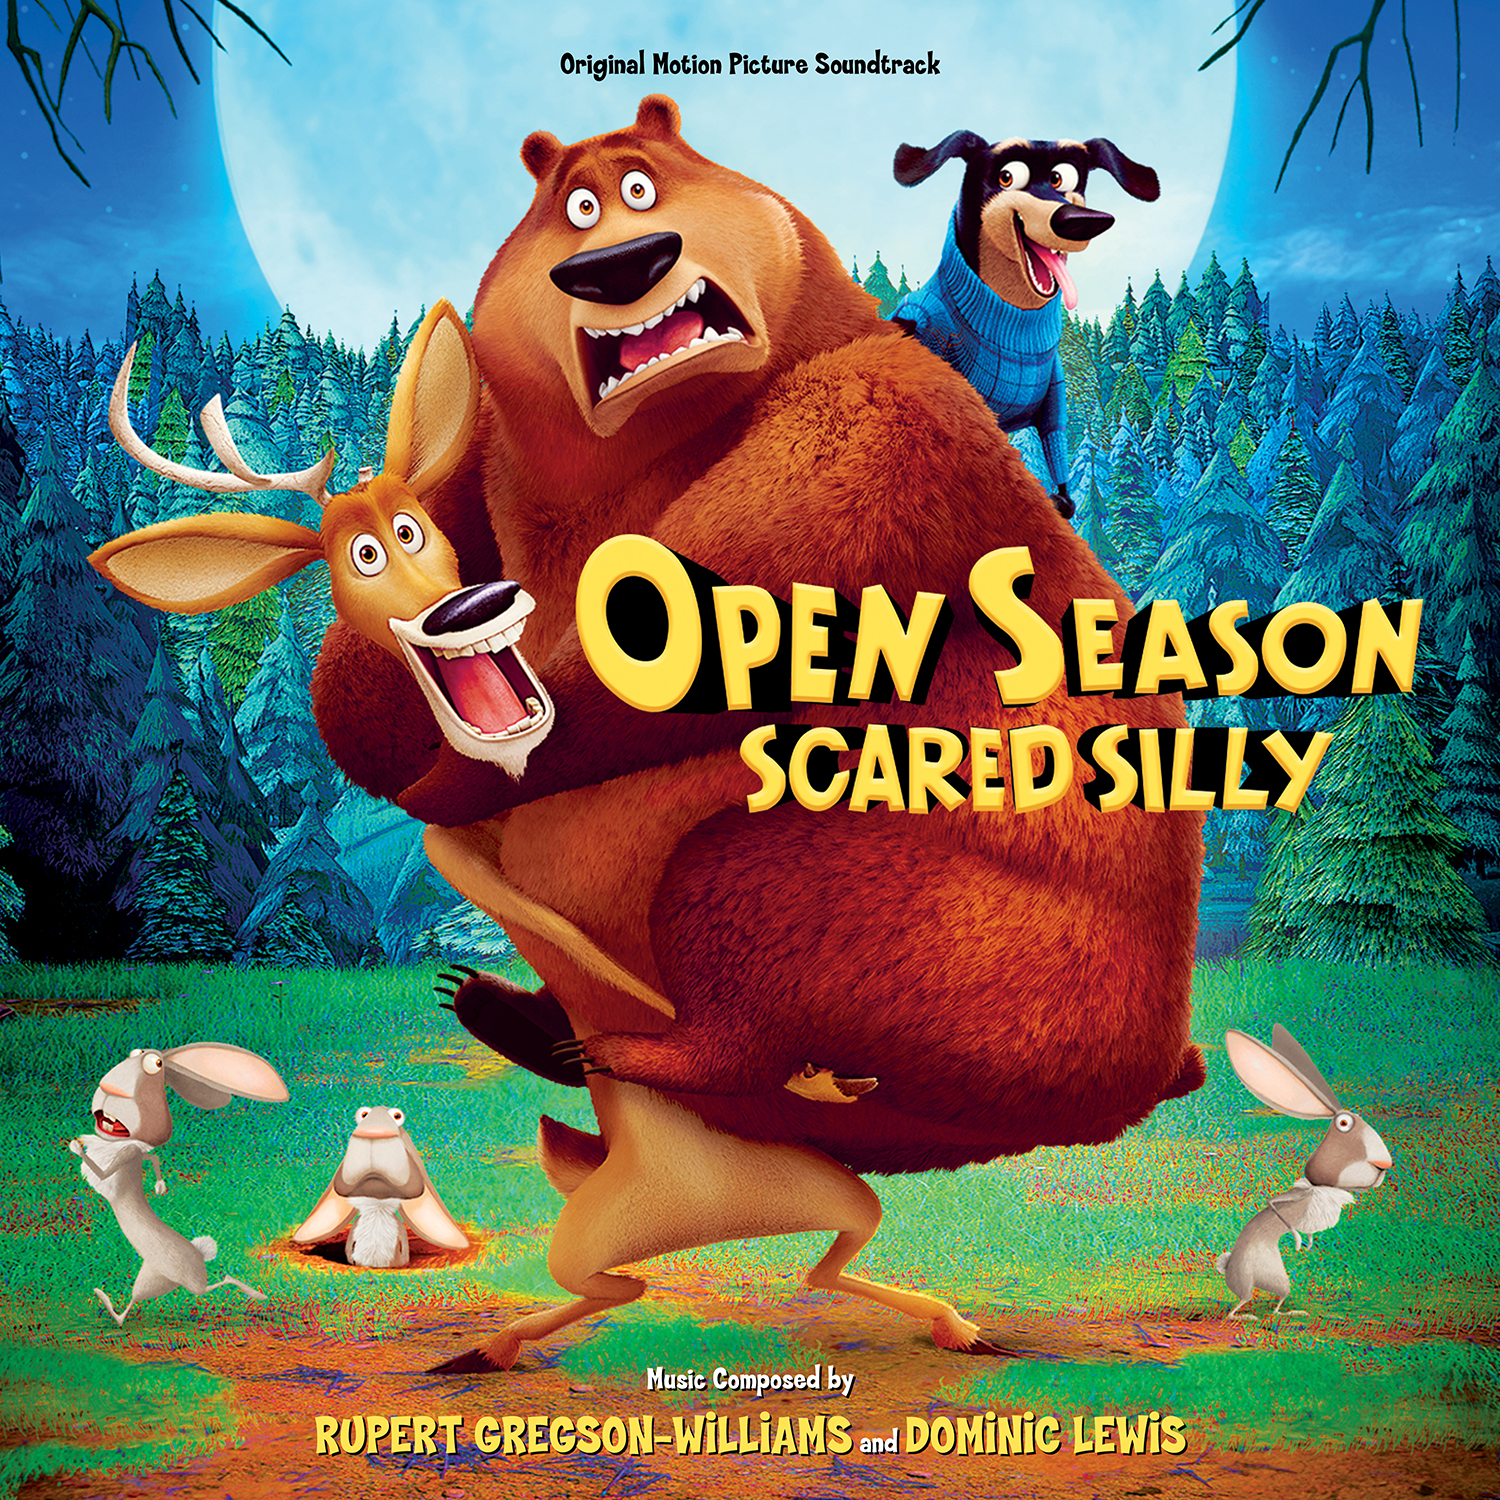 High Resolution Wallpaper | Open Season: Scared Silly 1500x1500 px